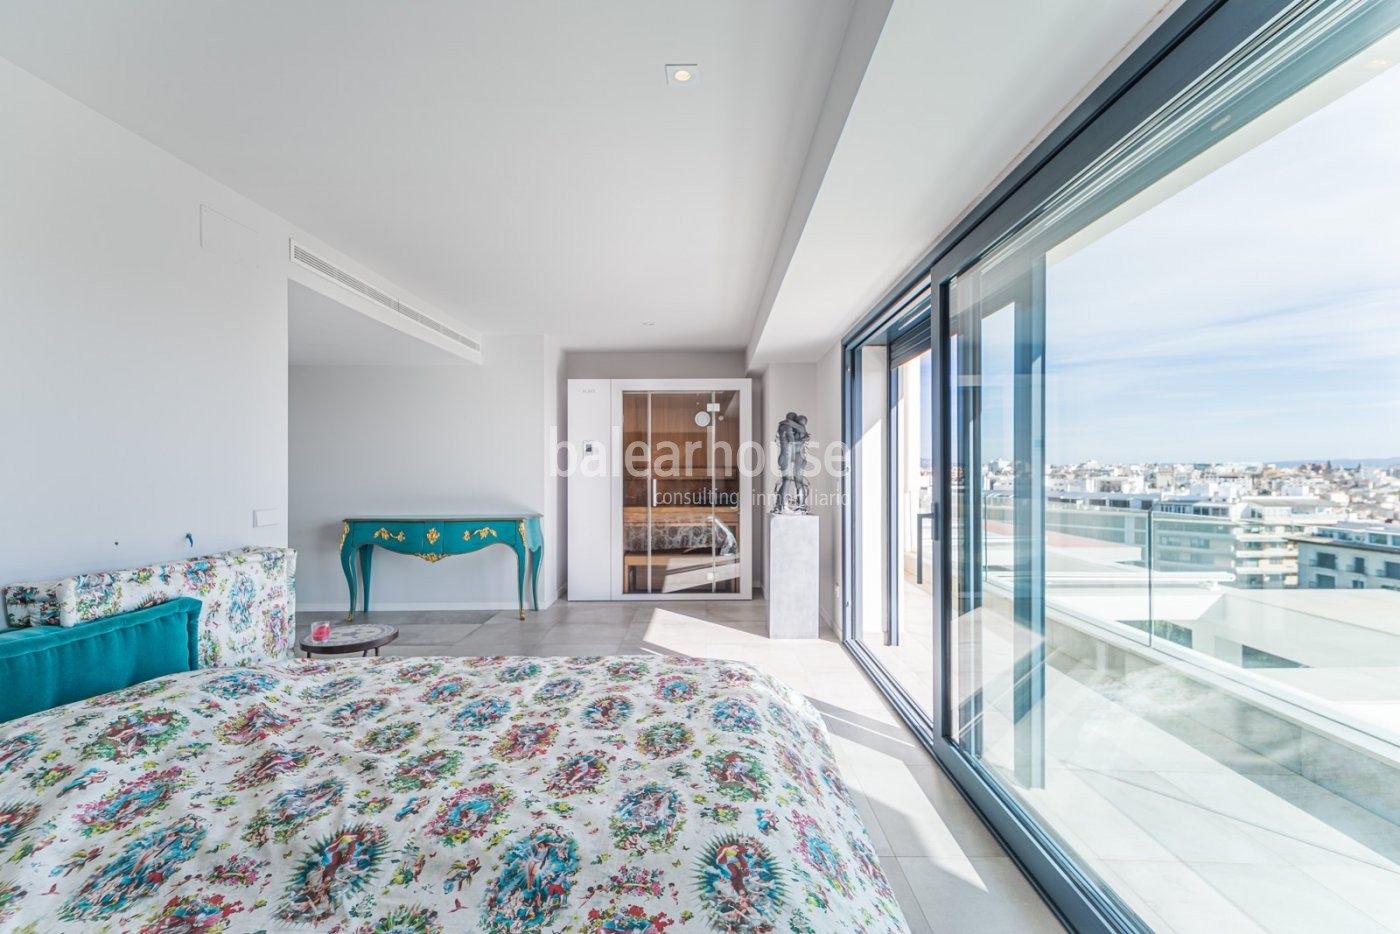 Spectacular designer penthouse in the centre of Palma with large terraces and beautiful views.